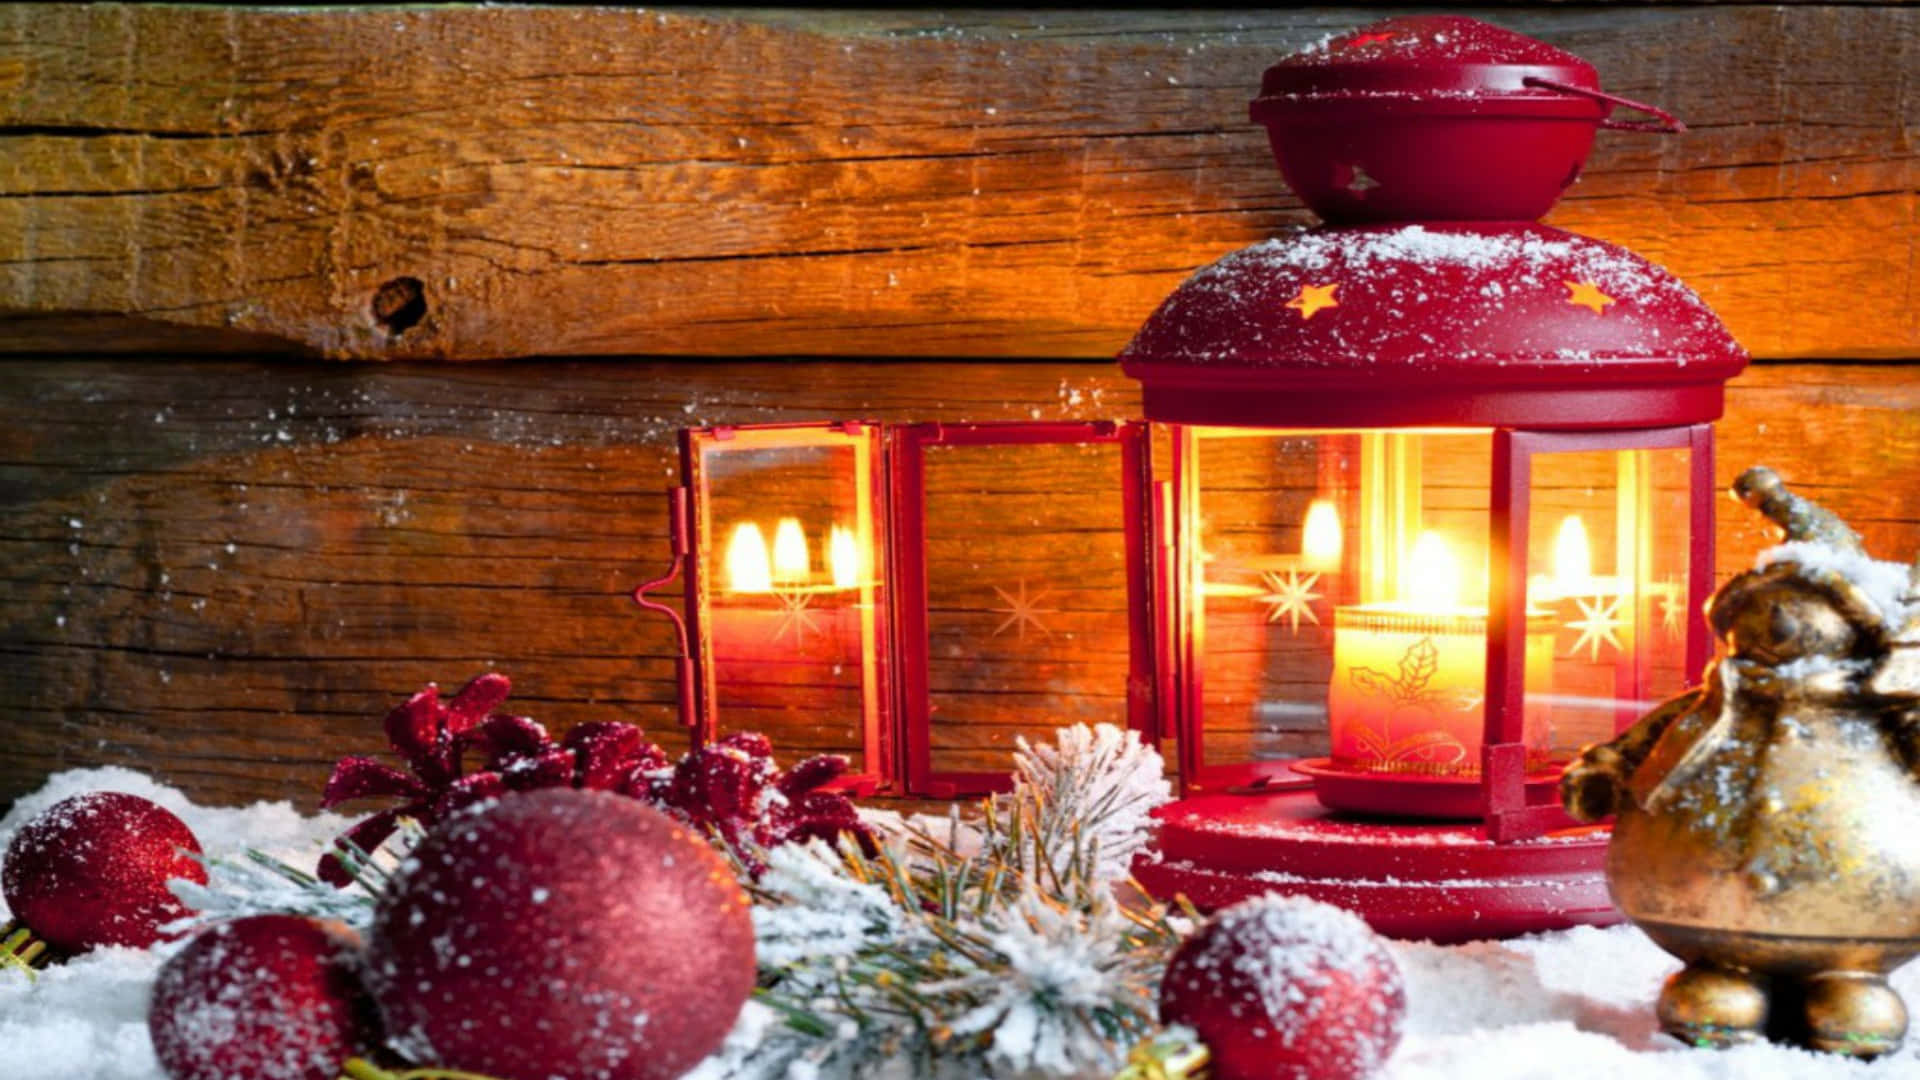 Download A Red Lantern With Candles And Ornaments On A Wooden ...